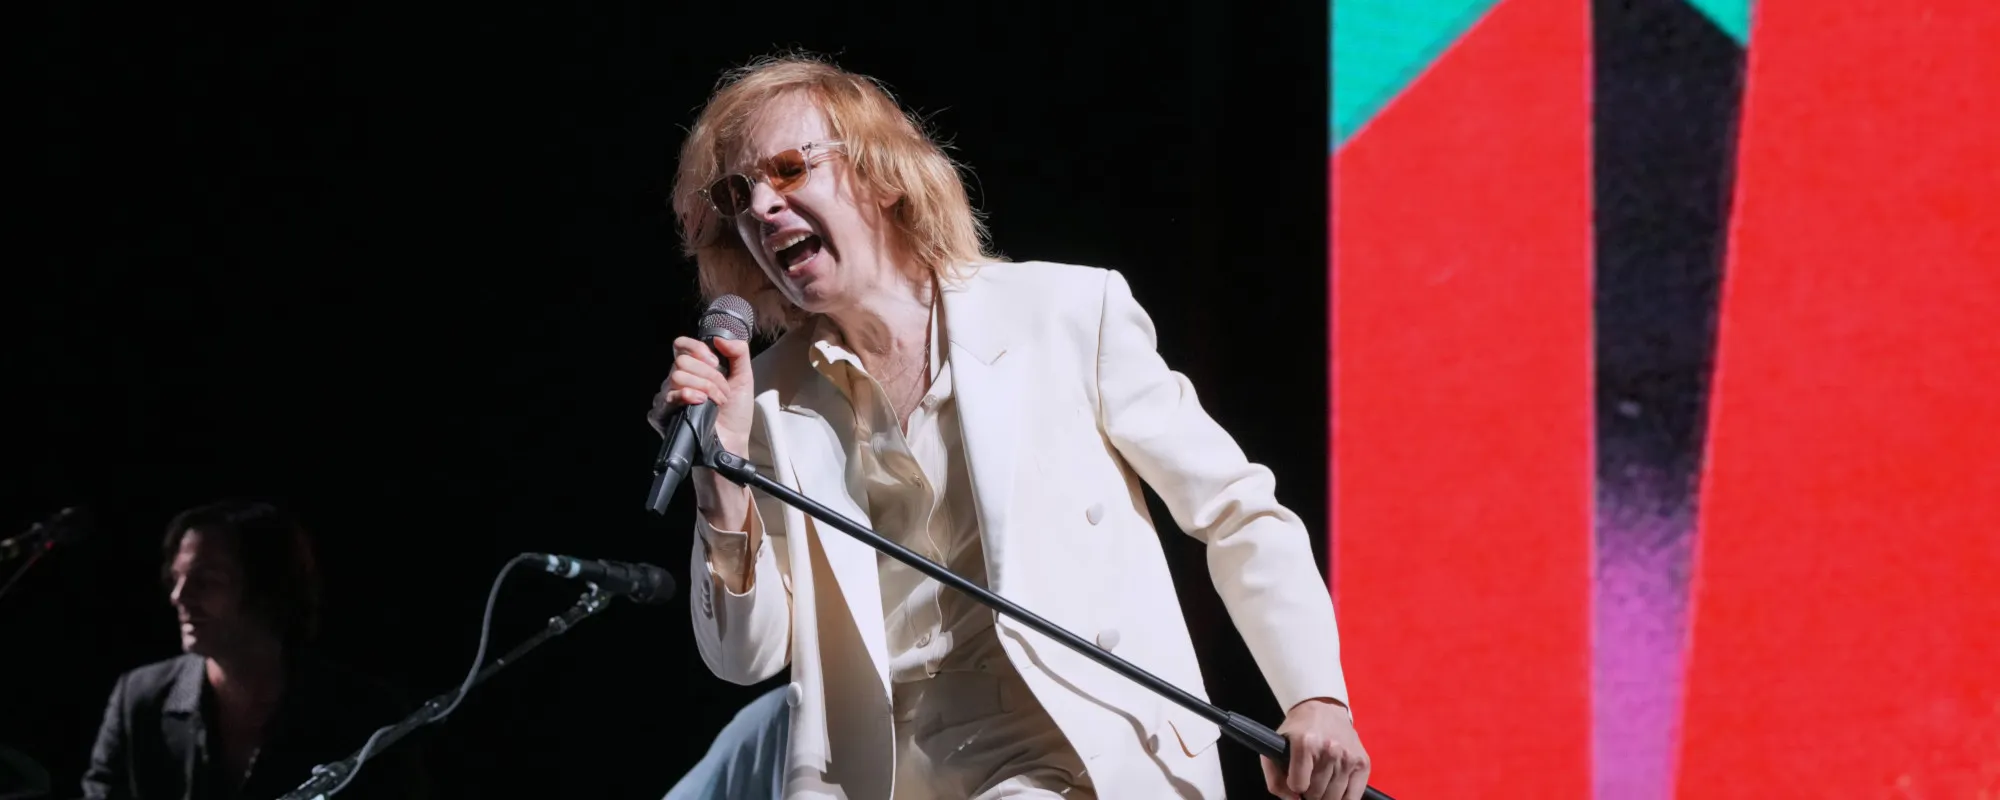 Beck Has Love on the Brain in New Song “Thinking About You”